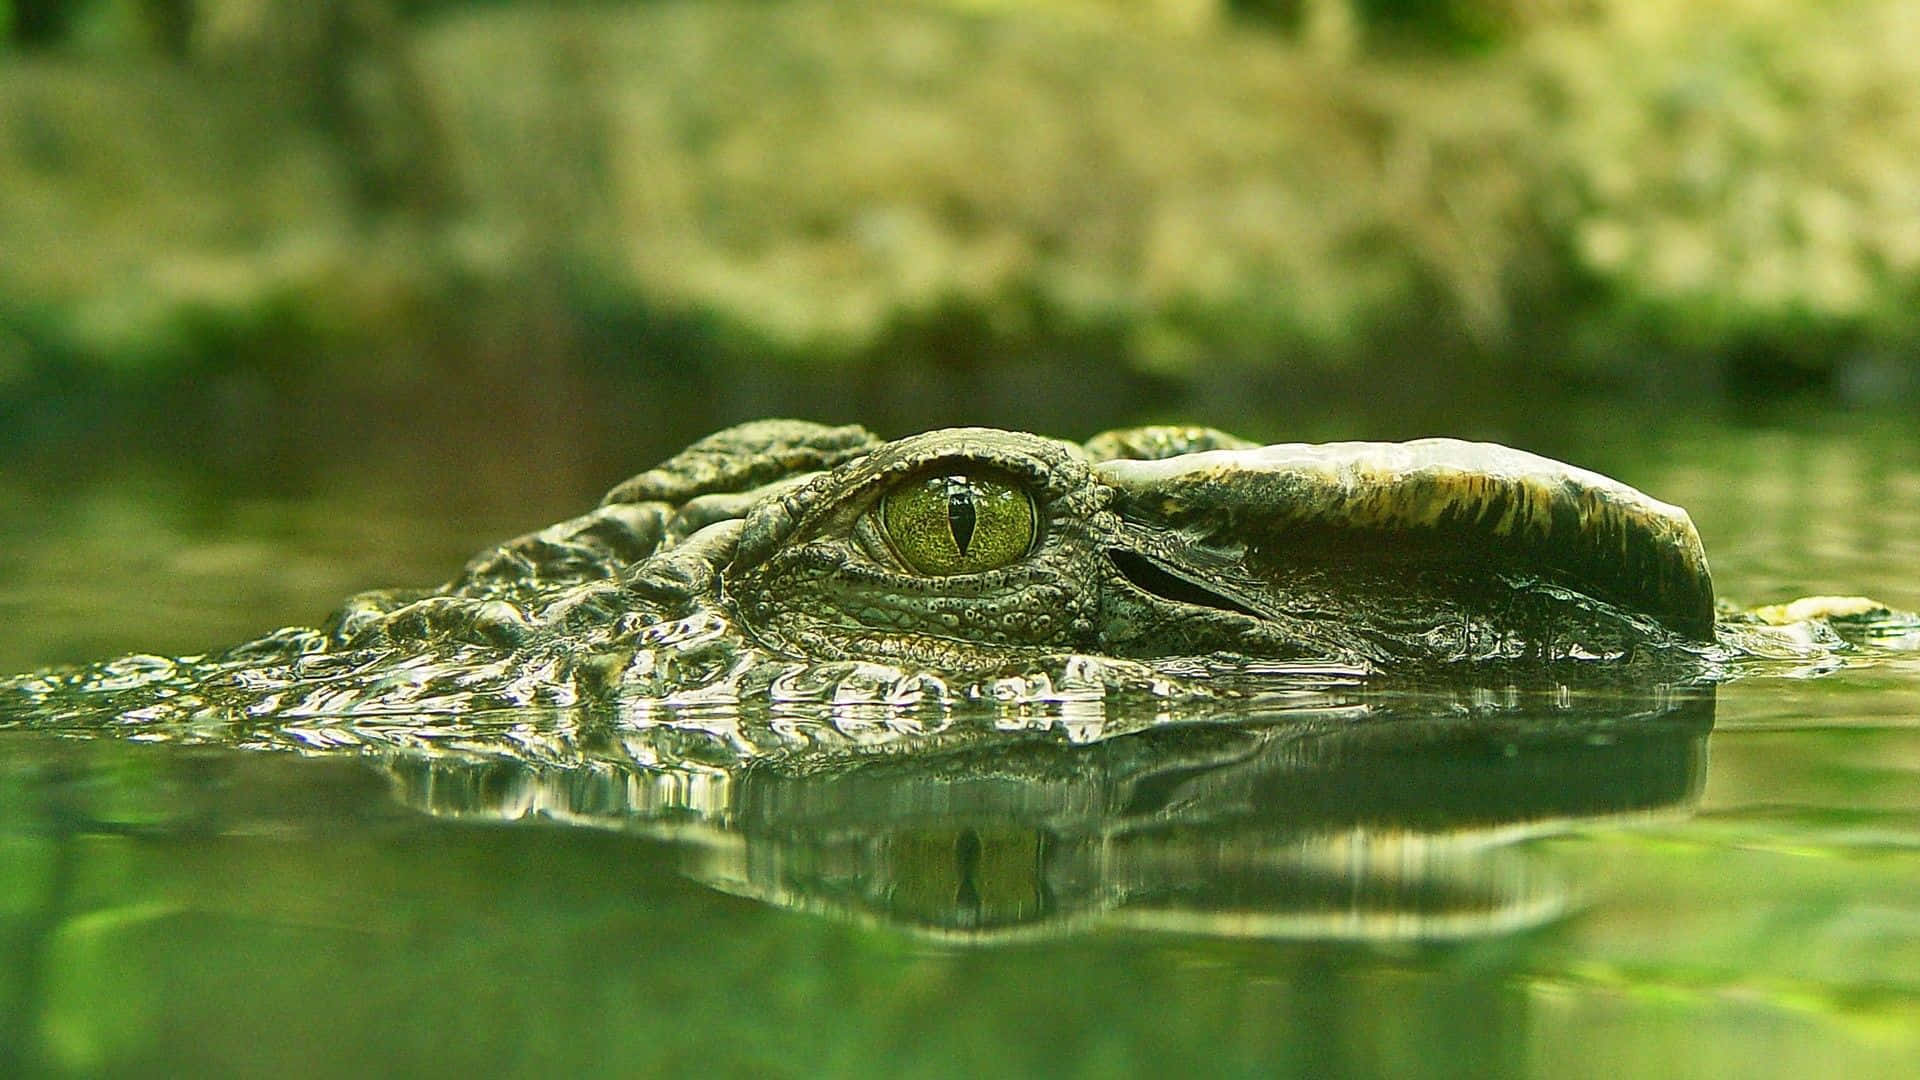 Green Mossy Water Crocodile Picture